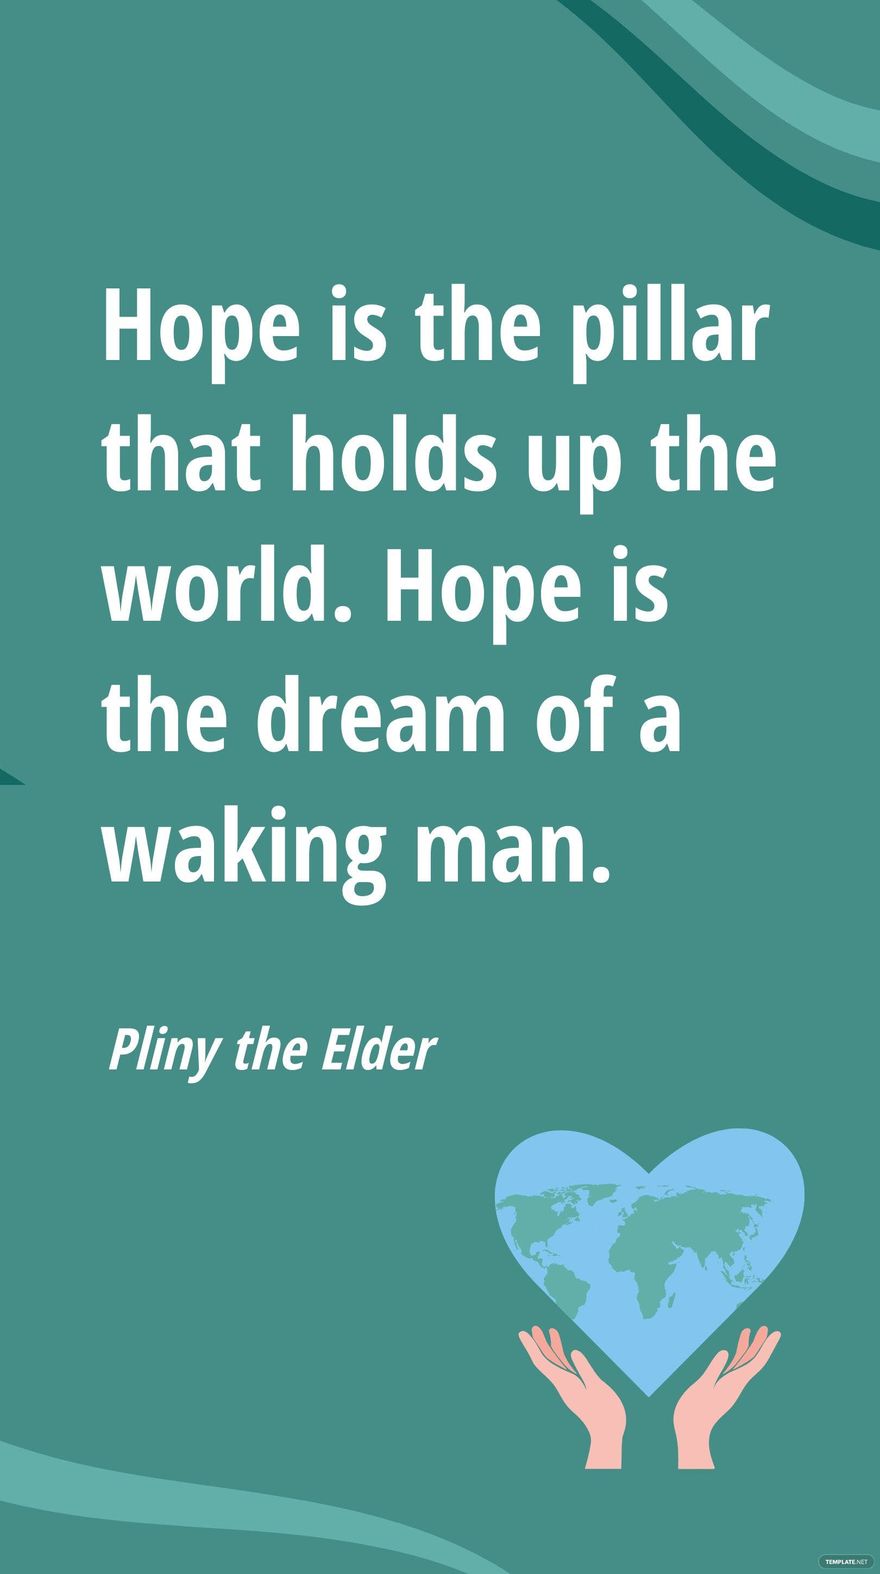 Free Pliny the Elder - Hope is the pillar that holds up the world. Hope is the dream of a waking man.